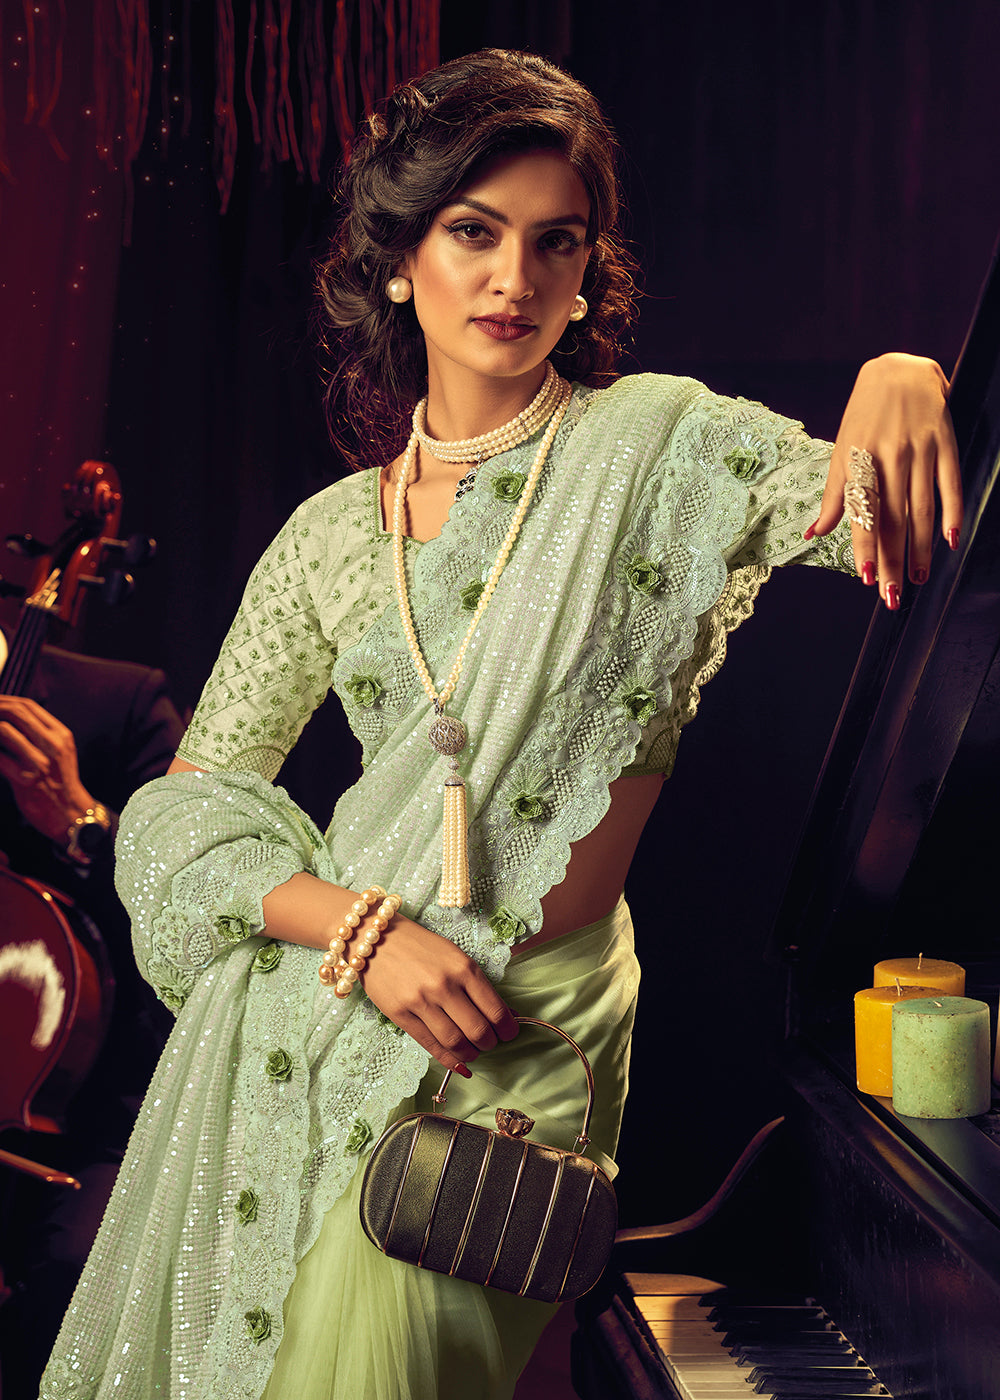 Shop Now Bridal Party Pista Green Premium Net Designer Saree from Empress Clothing in USA, UK, Canada & Worldwide. 